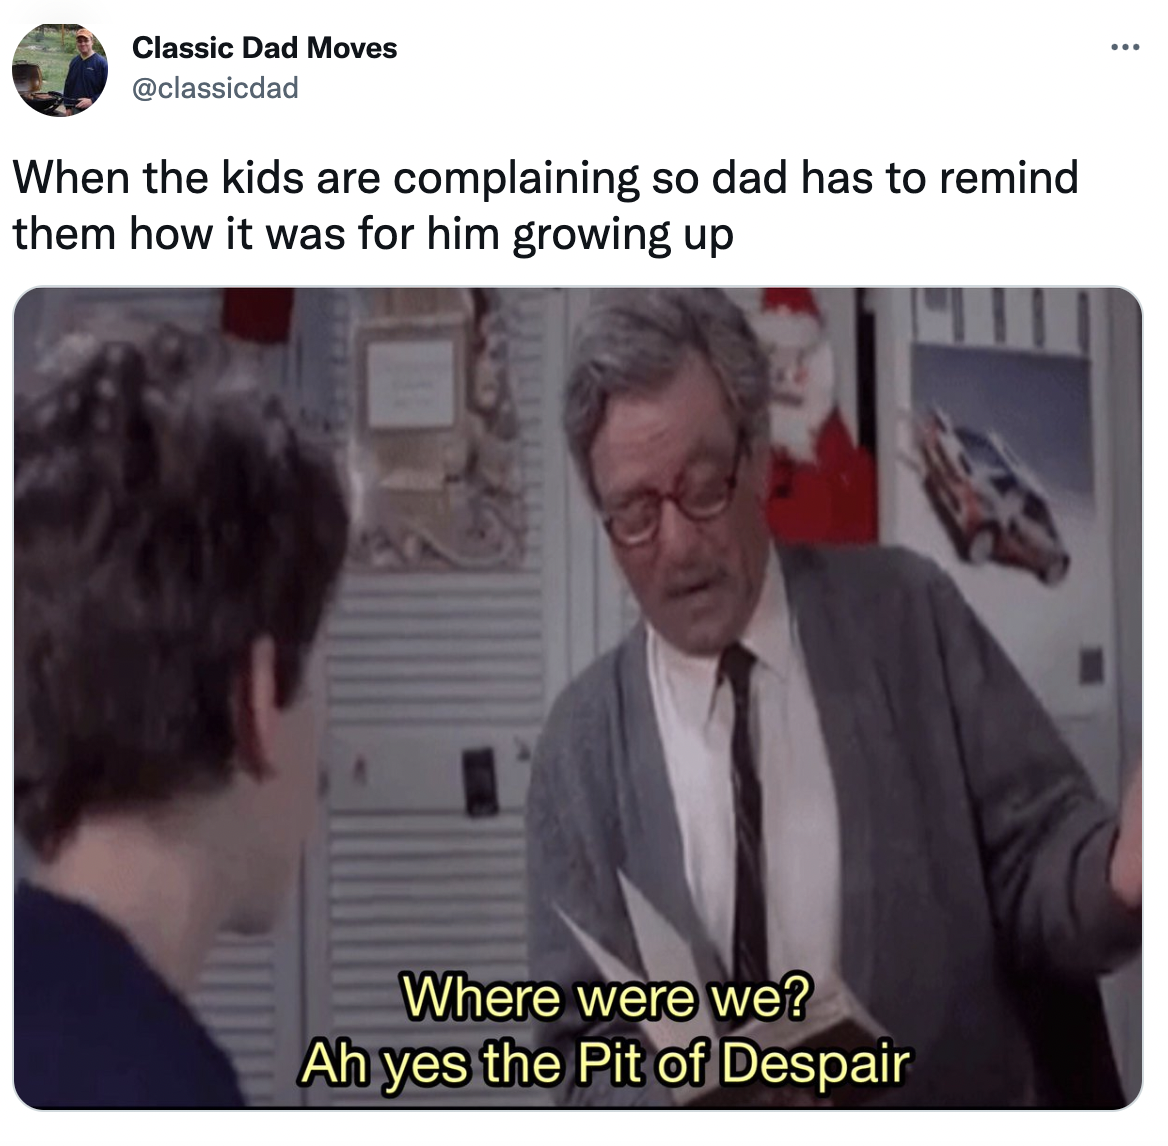 Dank Dad Memes - peter falk princess bride - Classic Dad Moves When the kids are complaining so dad has to remind them how it was for him growing up Where were we? Ah yes the Pit of Despair